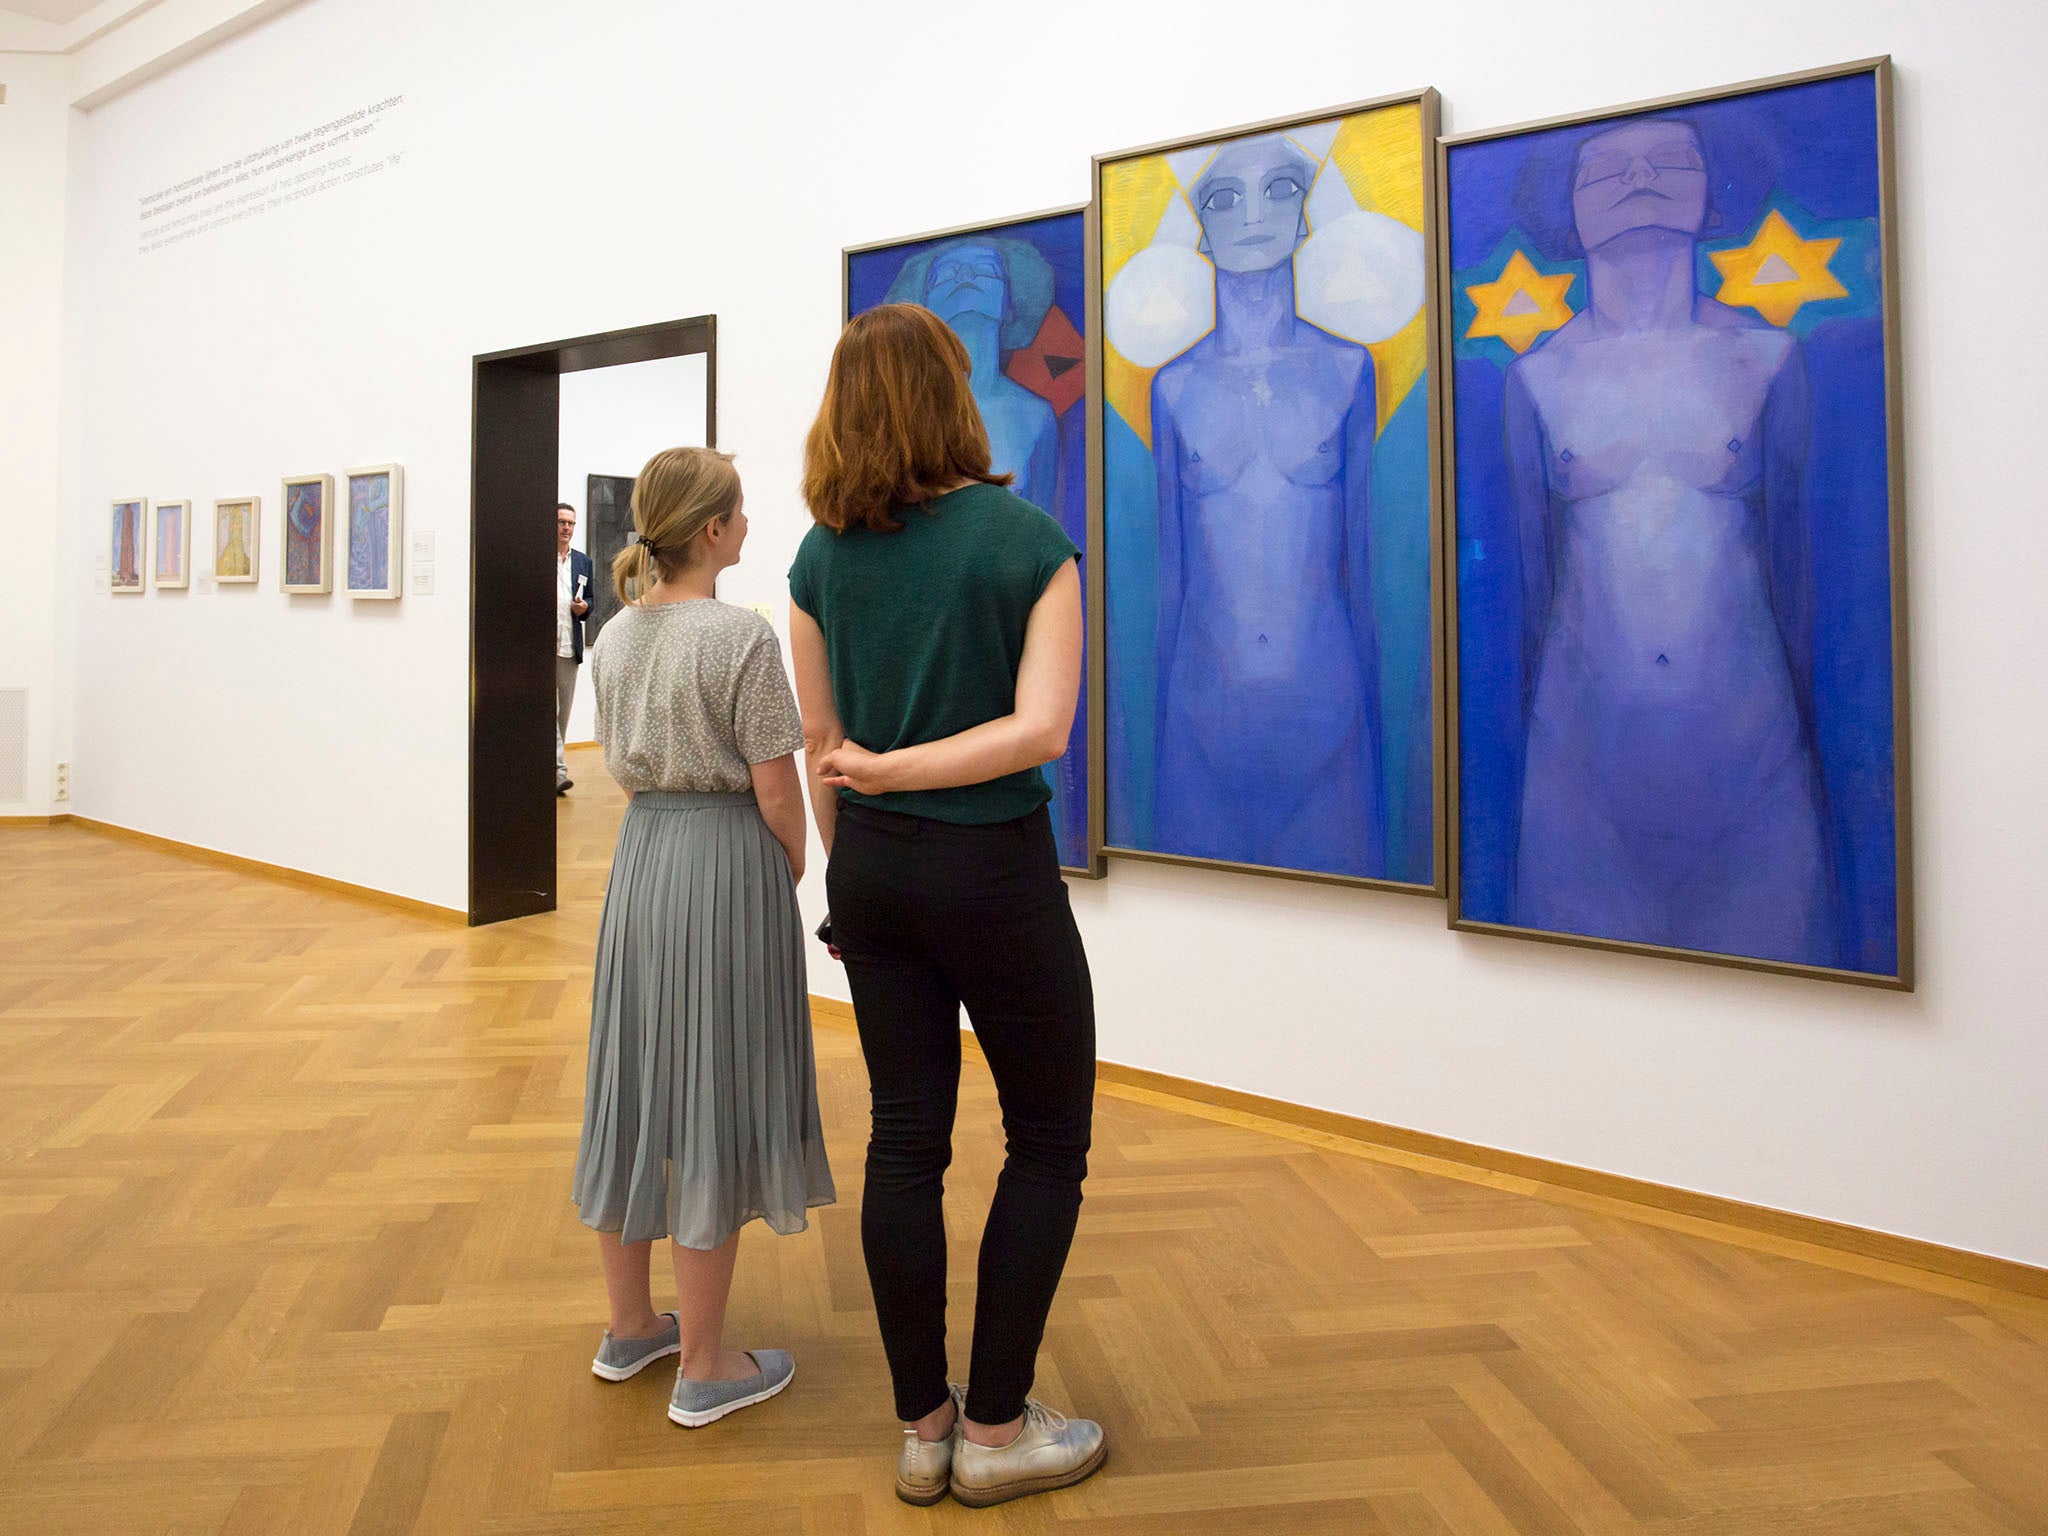 The Gemeentemuseum began to restore and conserve its works by Piet Mondrian in 2009